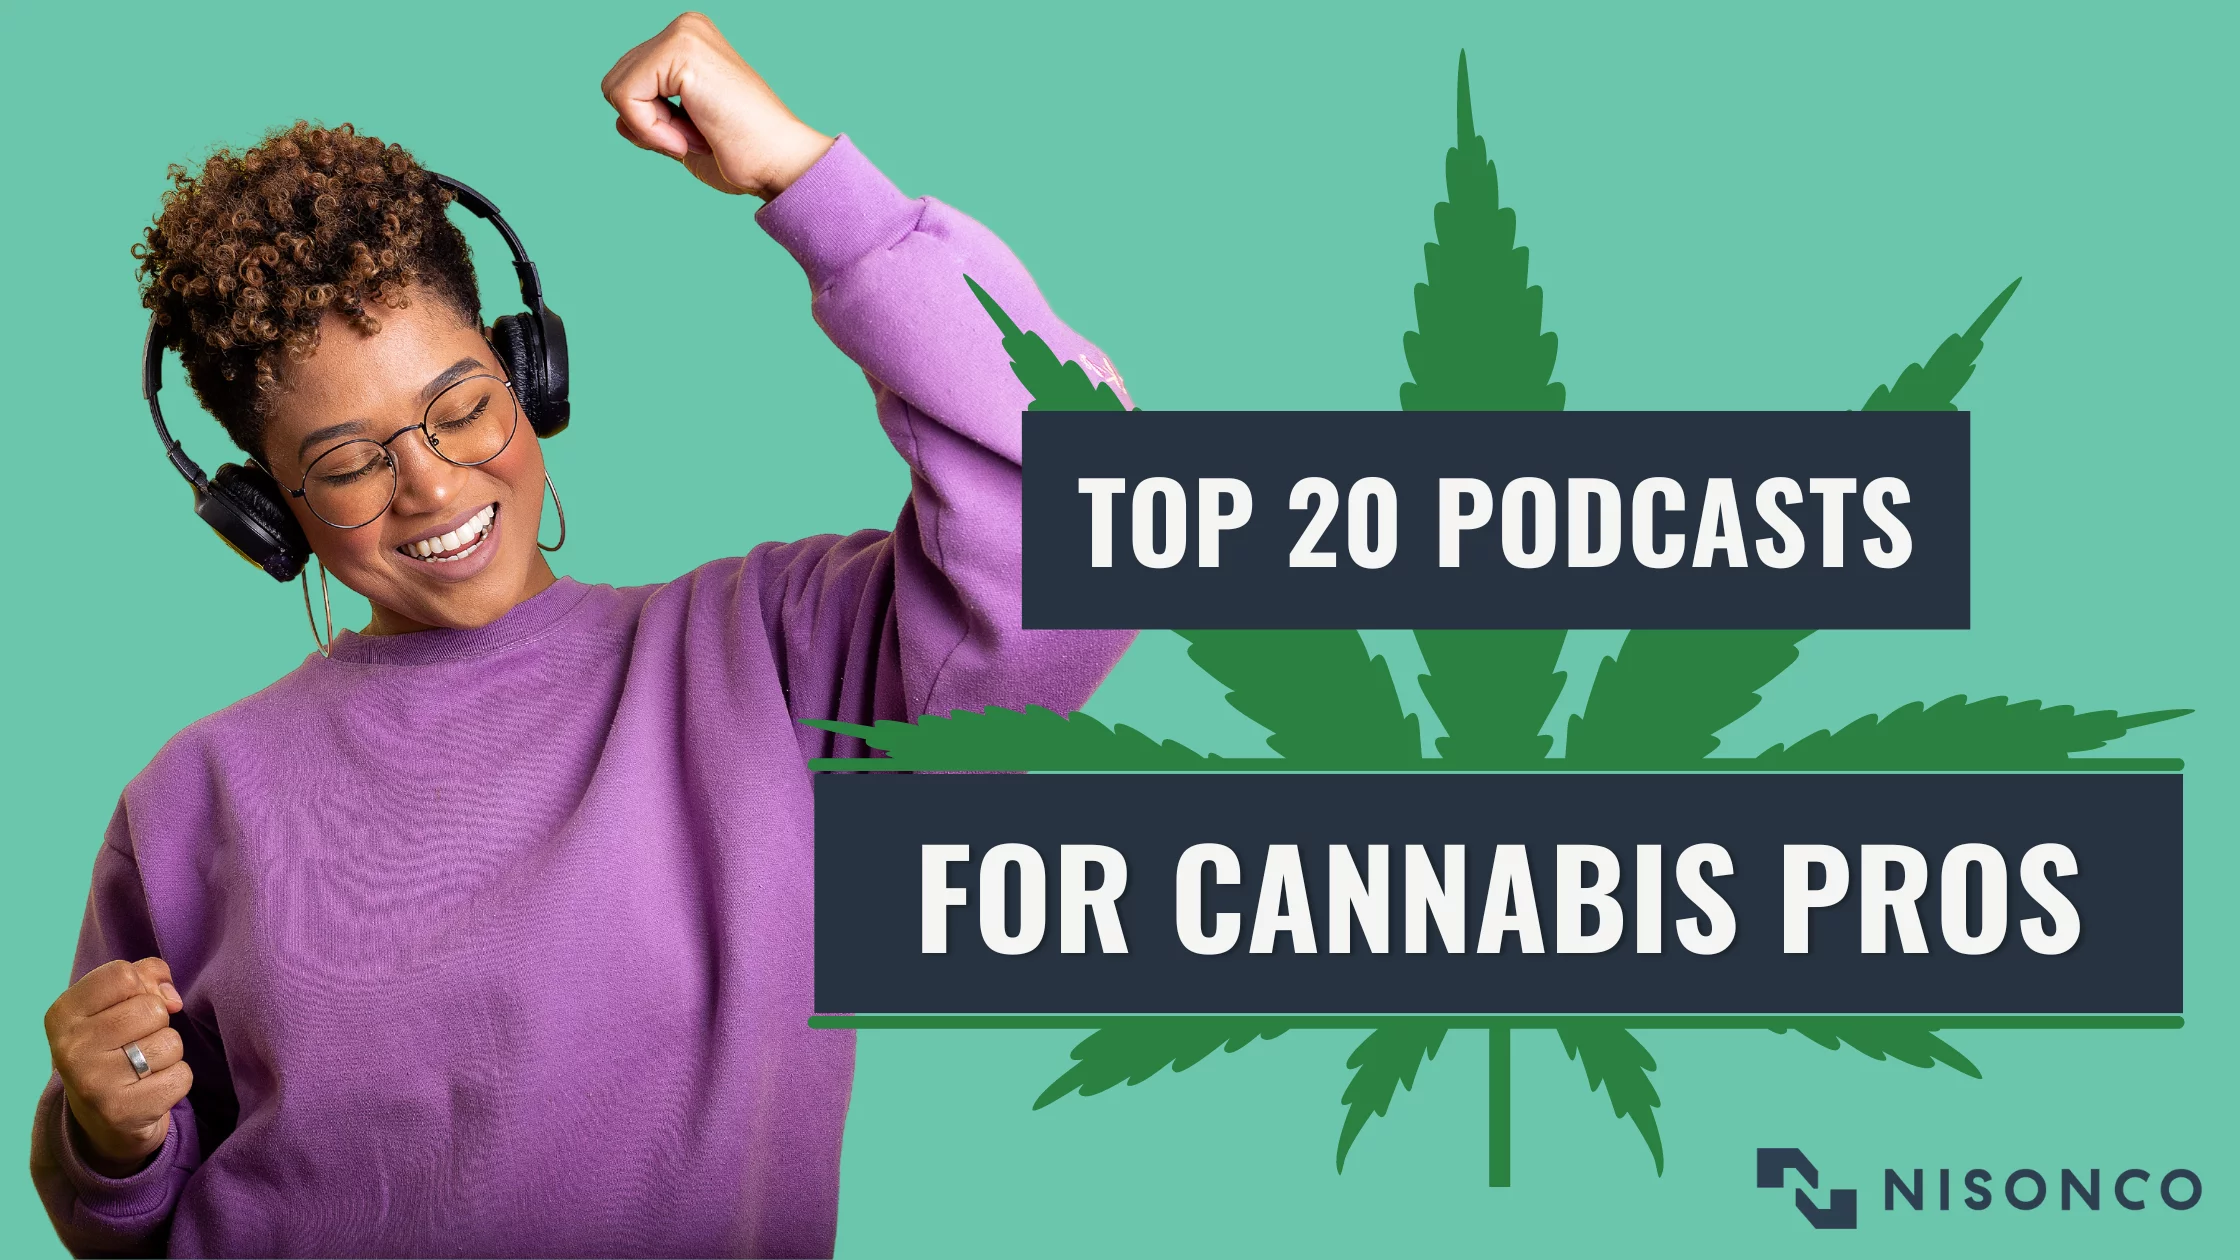 A woman wearing purple sweatshirt and headphones is fist-pumping, while the text Top 20 Podcasts for Cannabis Pros is superimposed over a cartoon cannabis leaf.